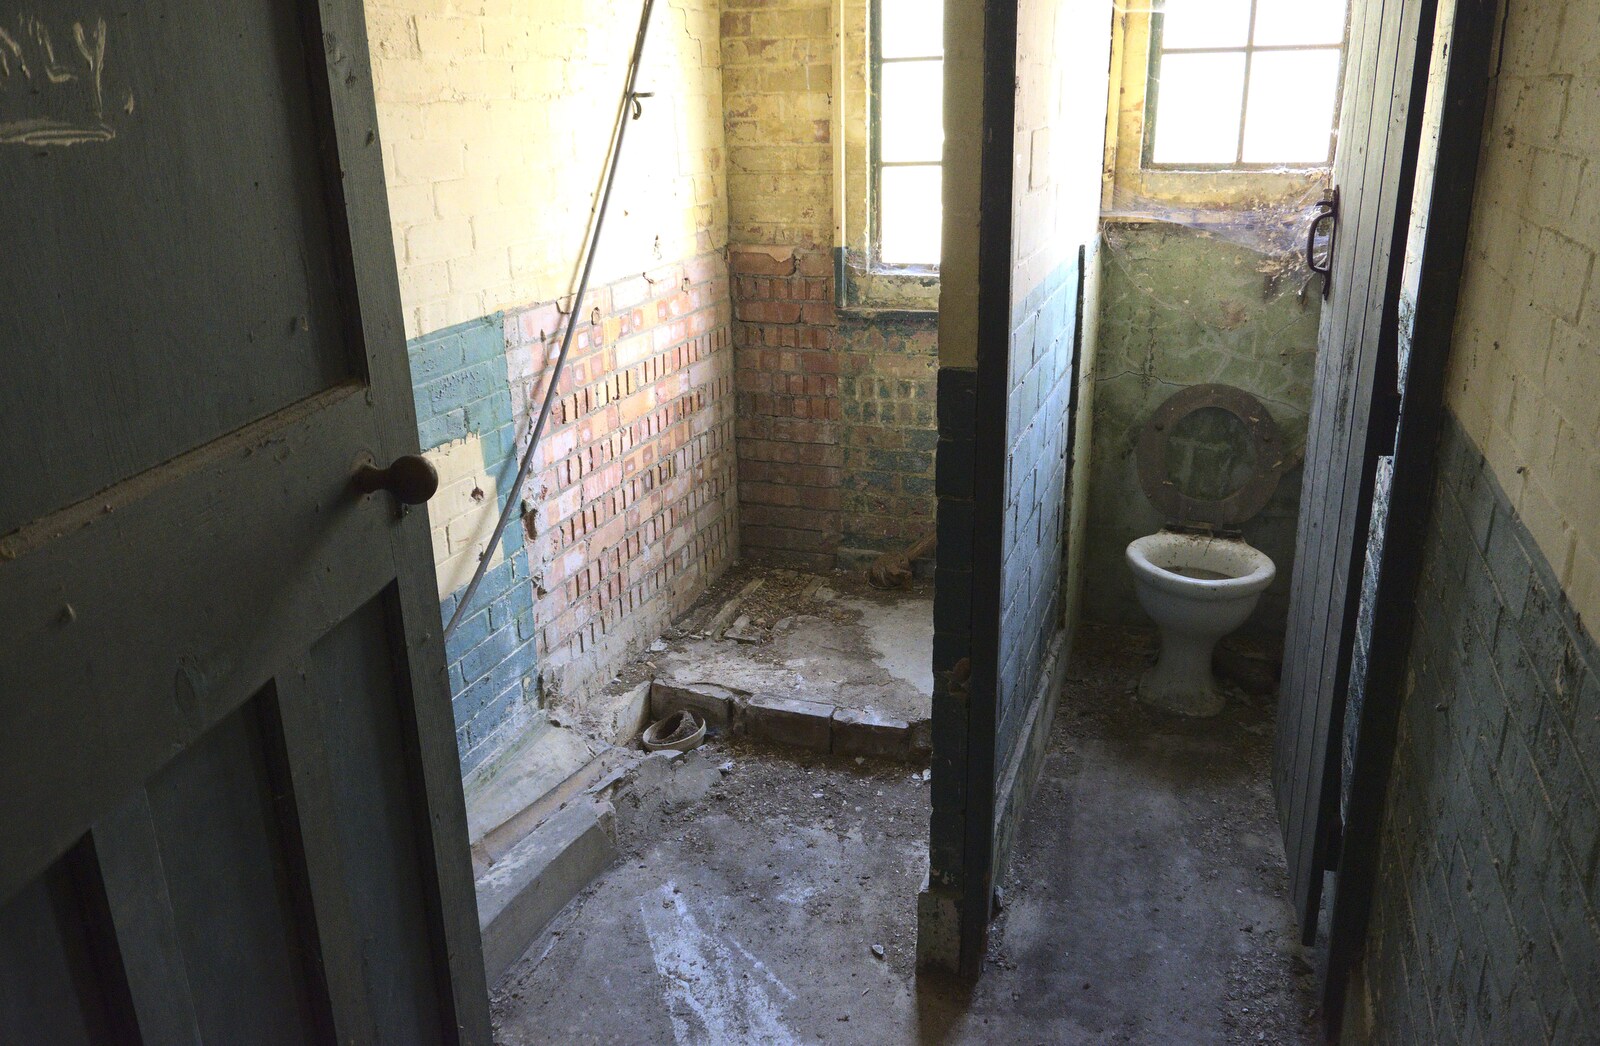 A shower and toilet  from A 1940s Timewarp, Site 4, Bungay Airfield, Flixton, Suffolk - 9th June 2022